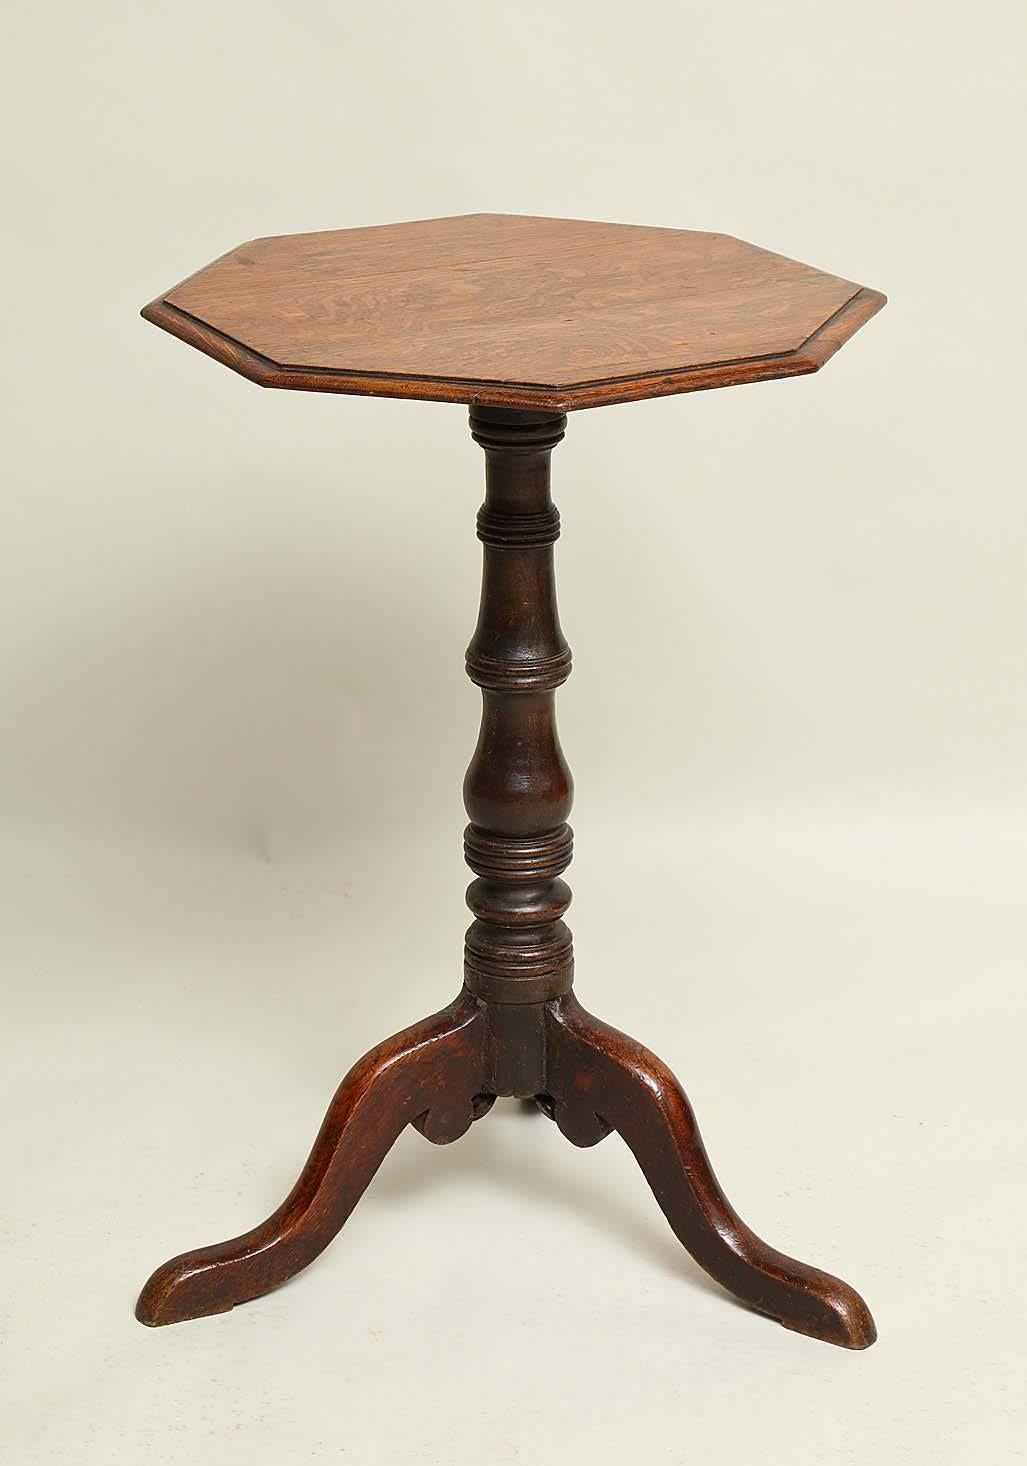 English Country Oak Octagonal Tripod Table In Good Condition For Sale In Greenwich, CT